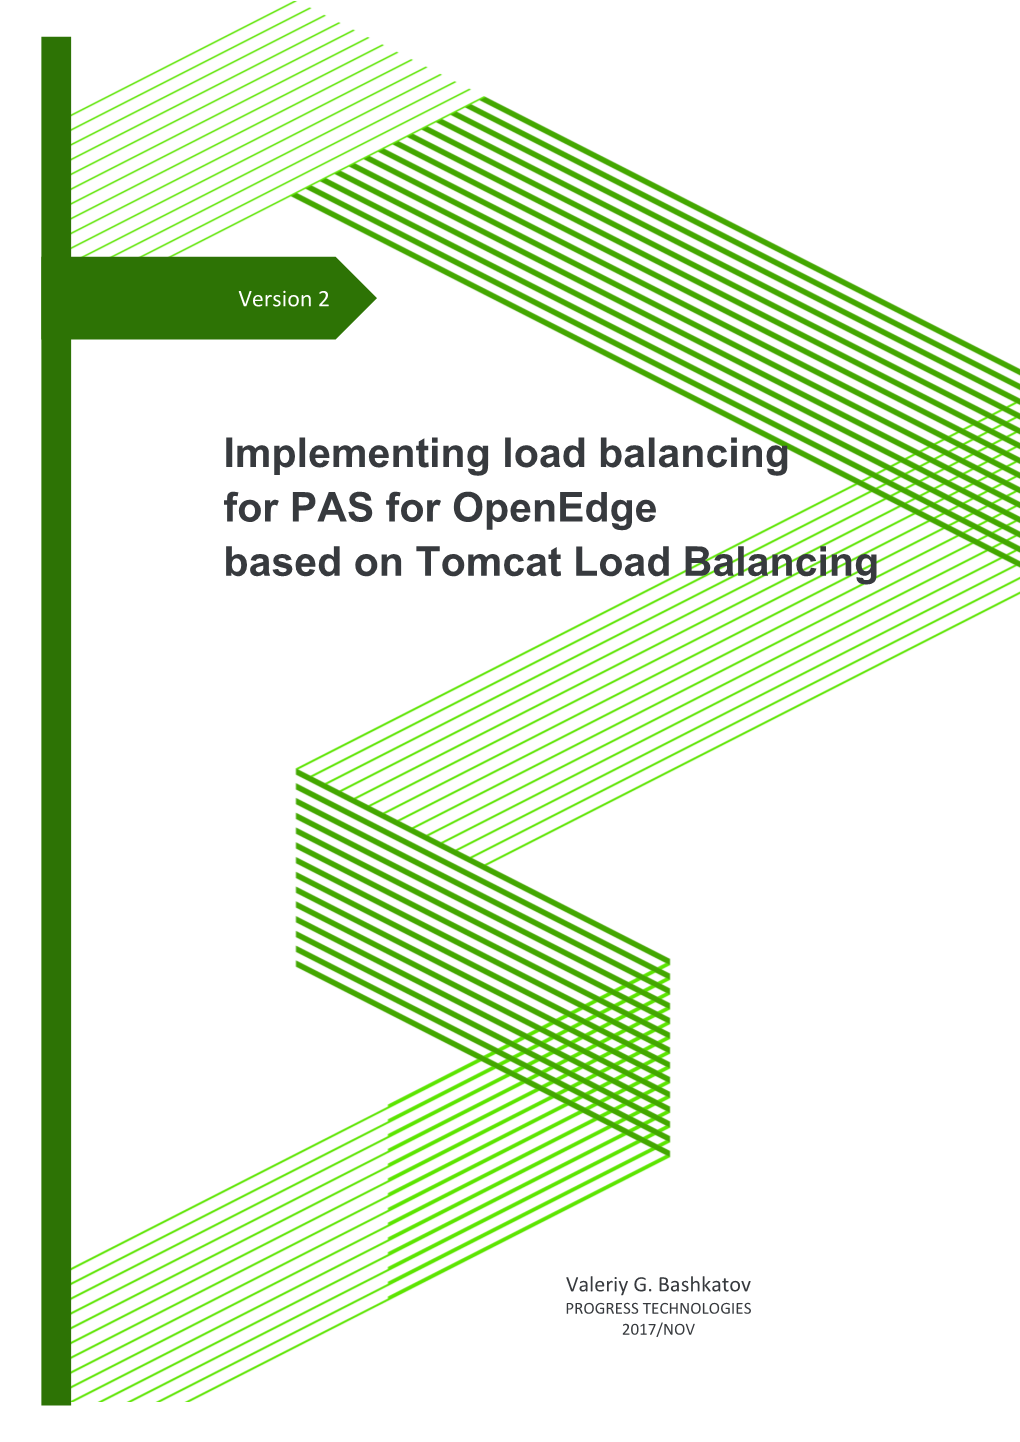 Tomcat Load Balancing for PAS for Openedge